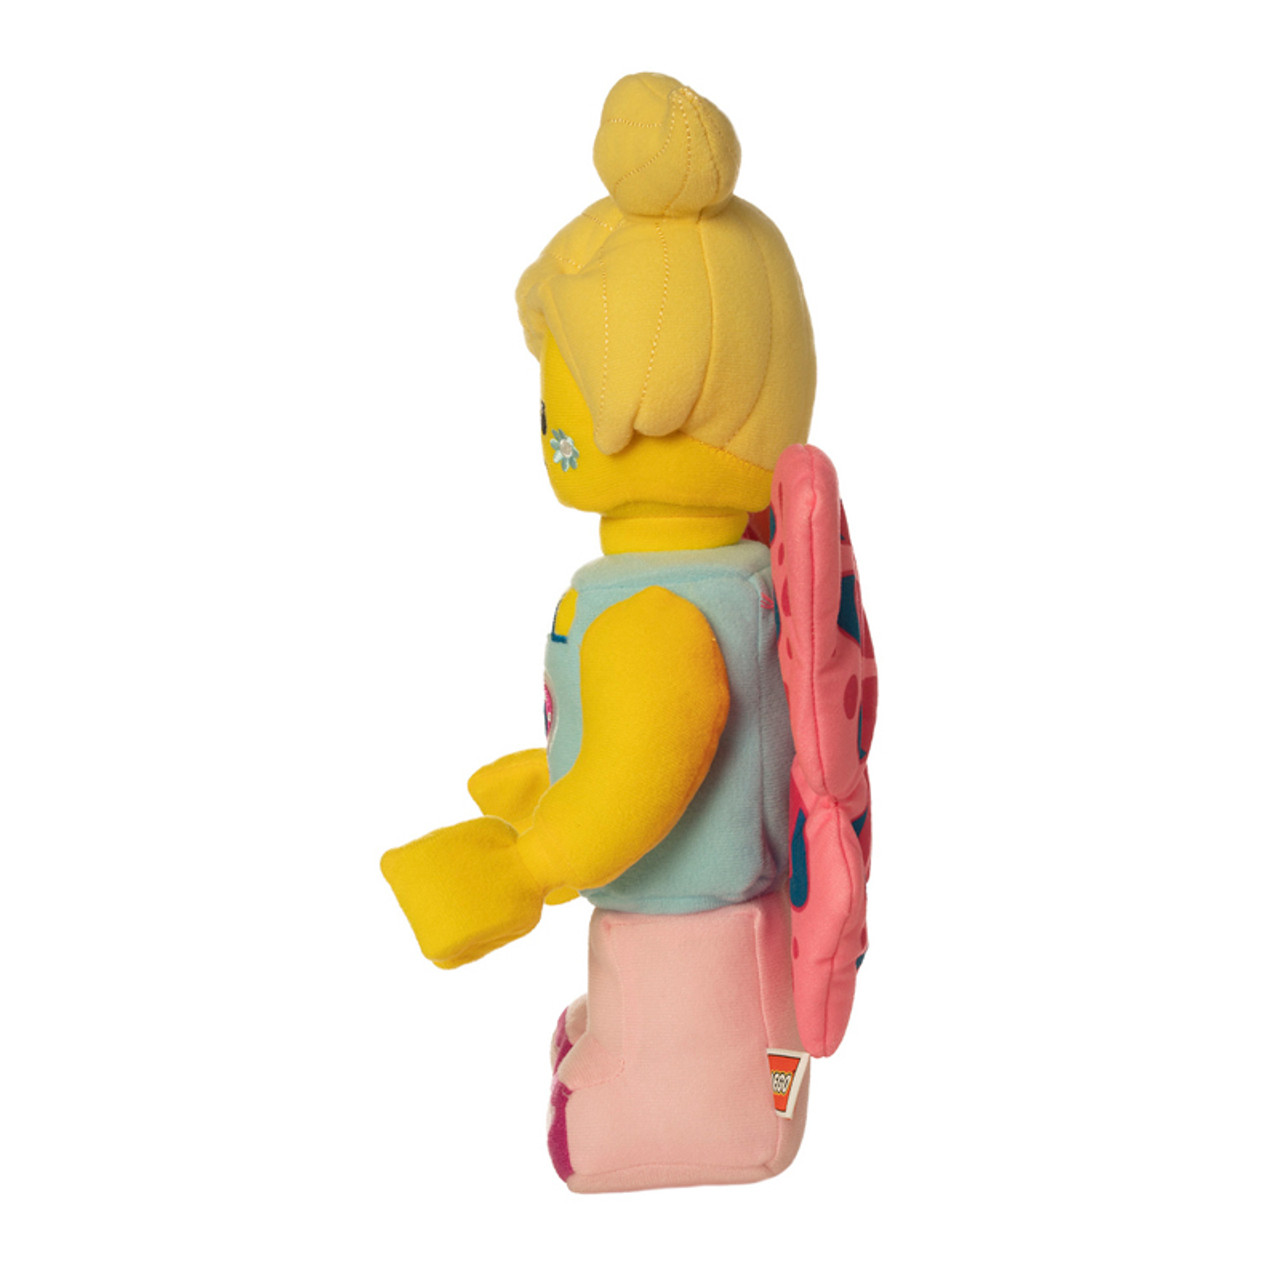 SideView Lego Iconic Butterfly Girl Plush, 35cm EAN 414293